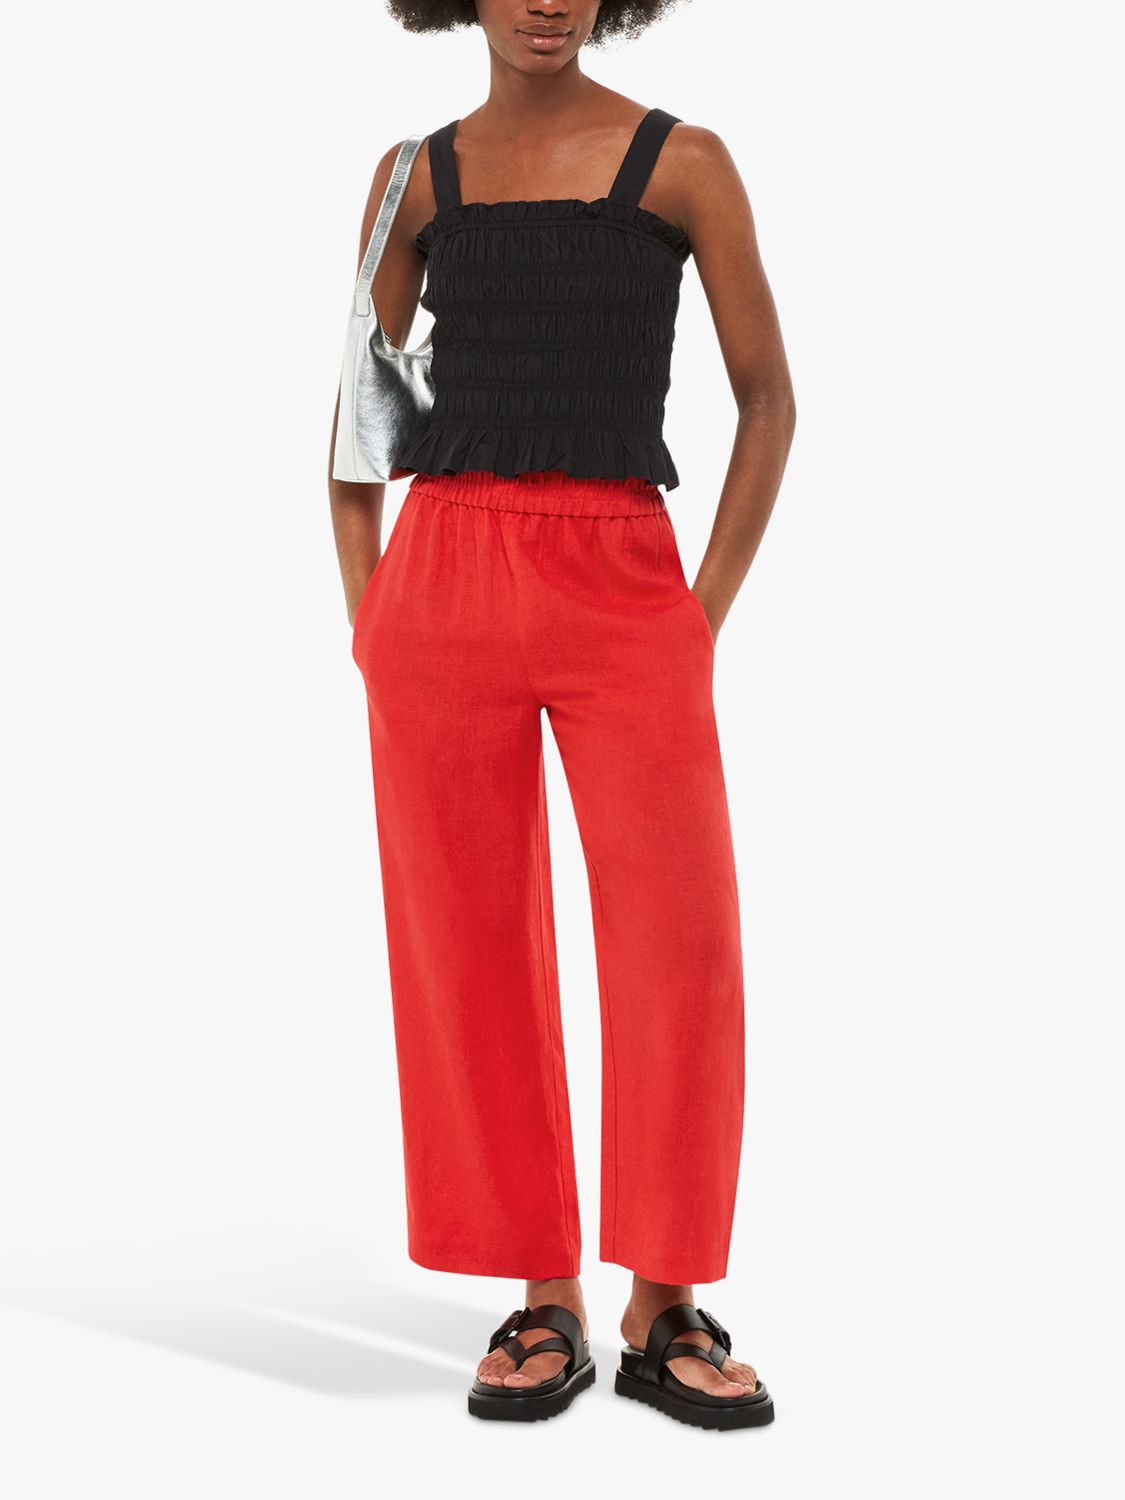 Whistles Linen Pocket Wide Leg Trousers, Red at John Lewis & Partners